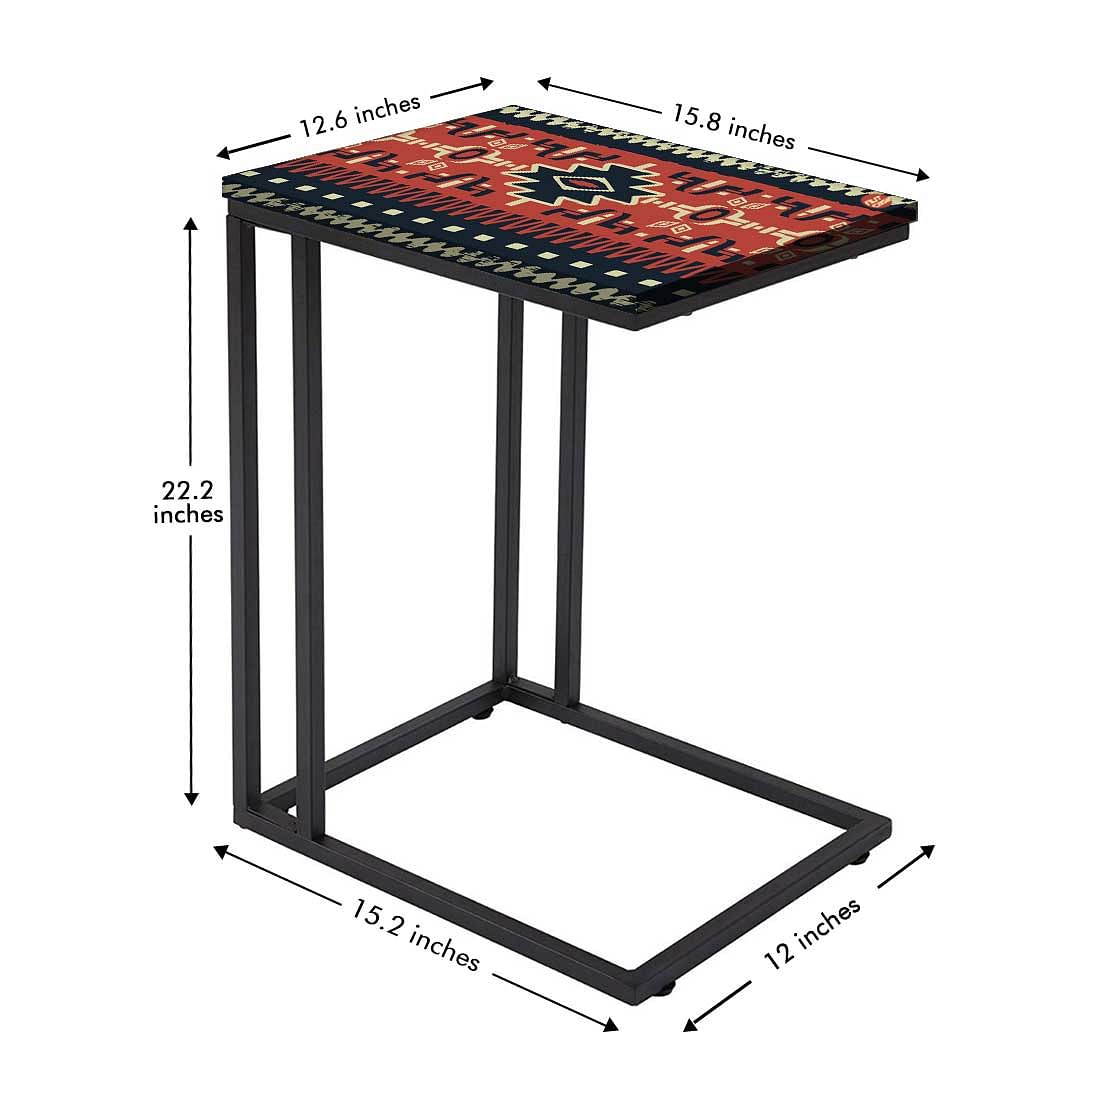 C SideTable For Sofa - Brown Mexican Pattern Nutcase